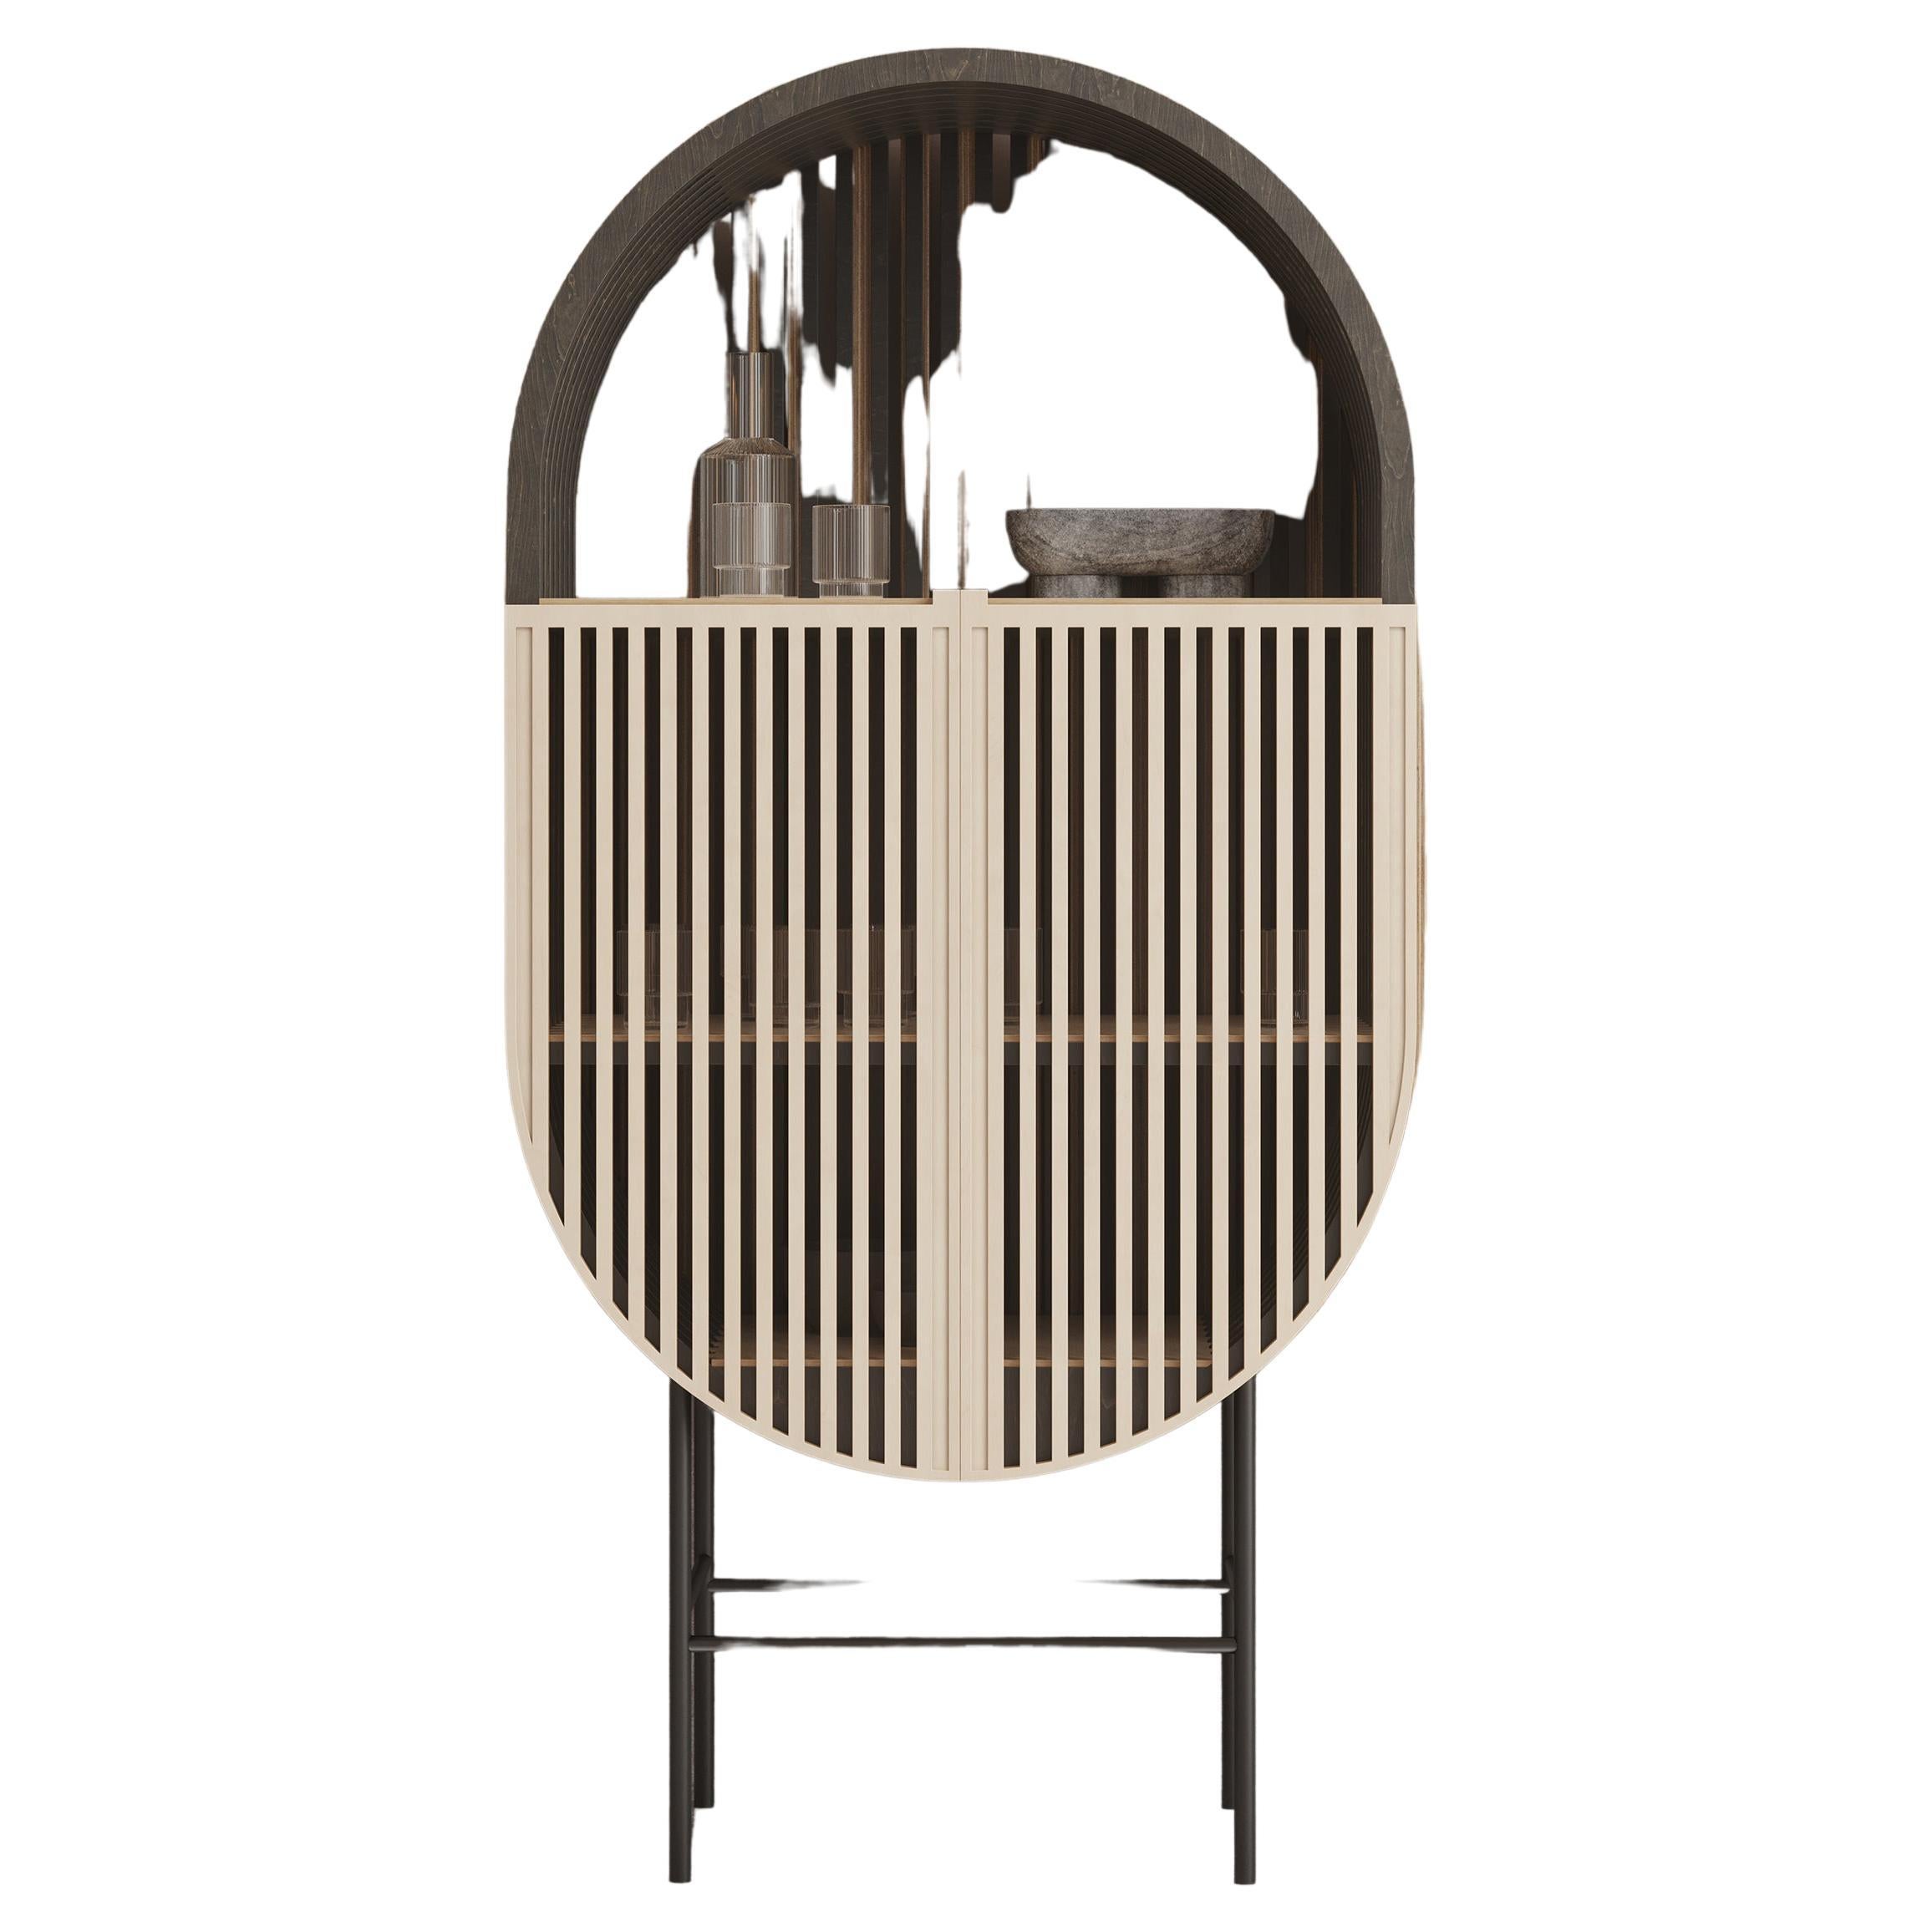 This Bar Cabinet pays tribute to the National Spirit of Scandinavia. 
Elegant piece through the characteristic wooden slats, the creased lines and the smooth architectural design. All in perfect harmony with the necessary functionalities of a bar